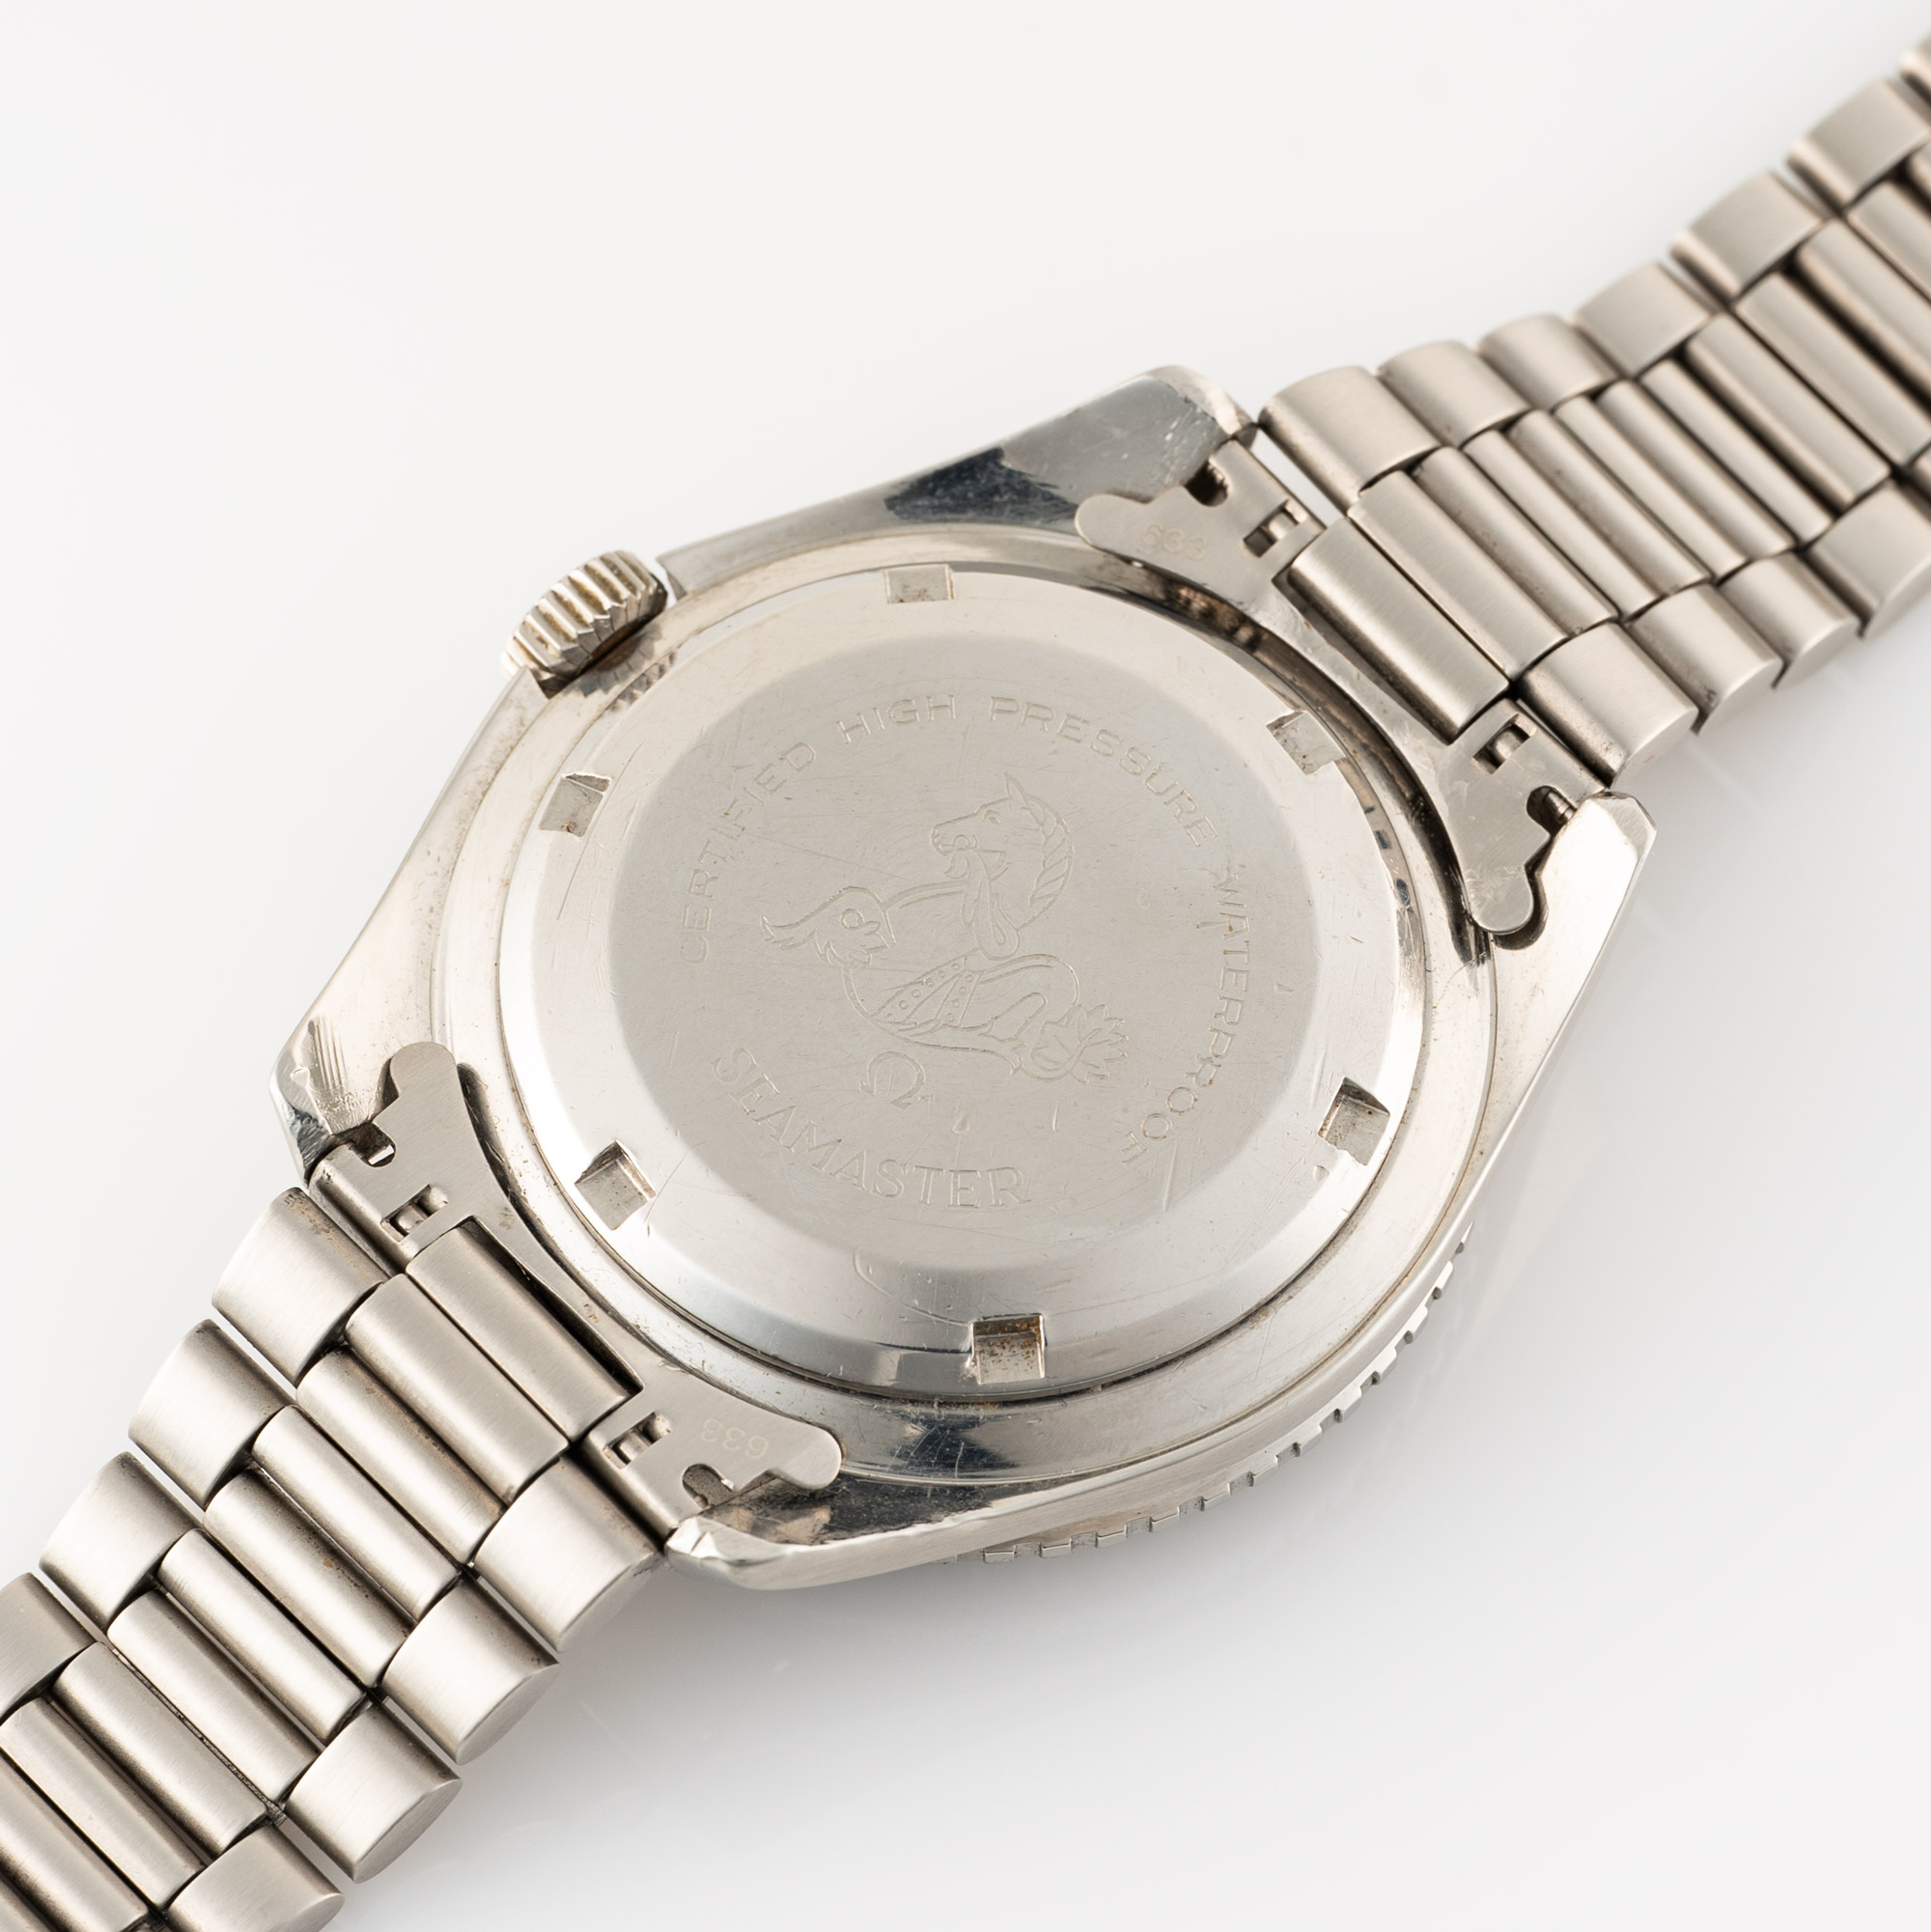 A GENTLEMAN'S SIZE STAINLESS STEEL OMEGA SEAMASTER 300 DIVERS BRACELET WATCH CIRCA 1965, REF. 165. - Image 9 of 10